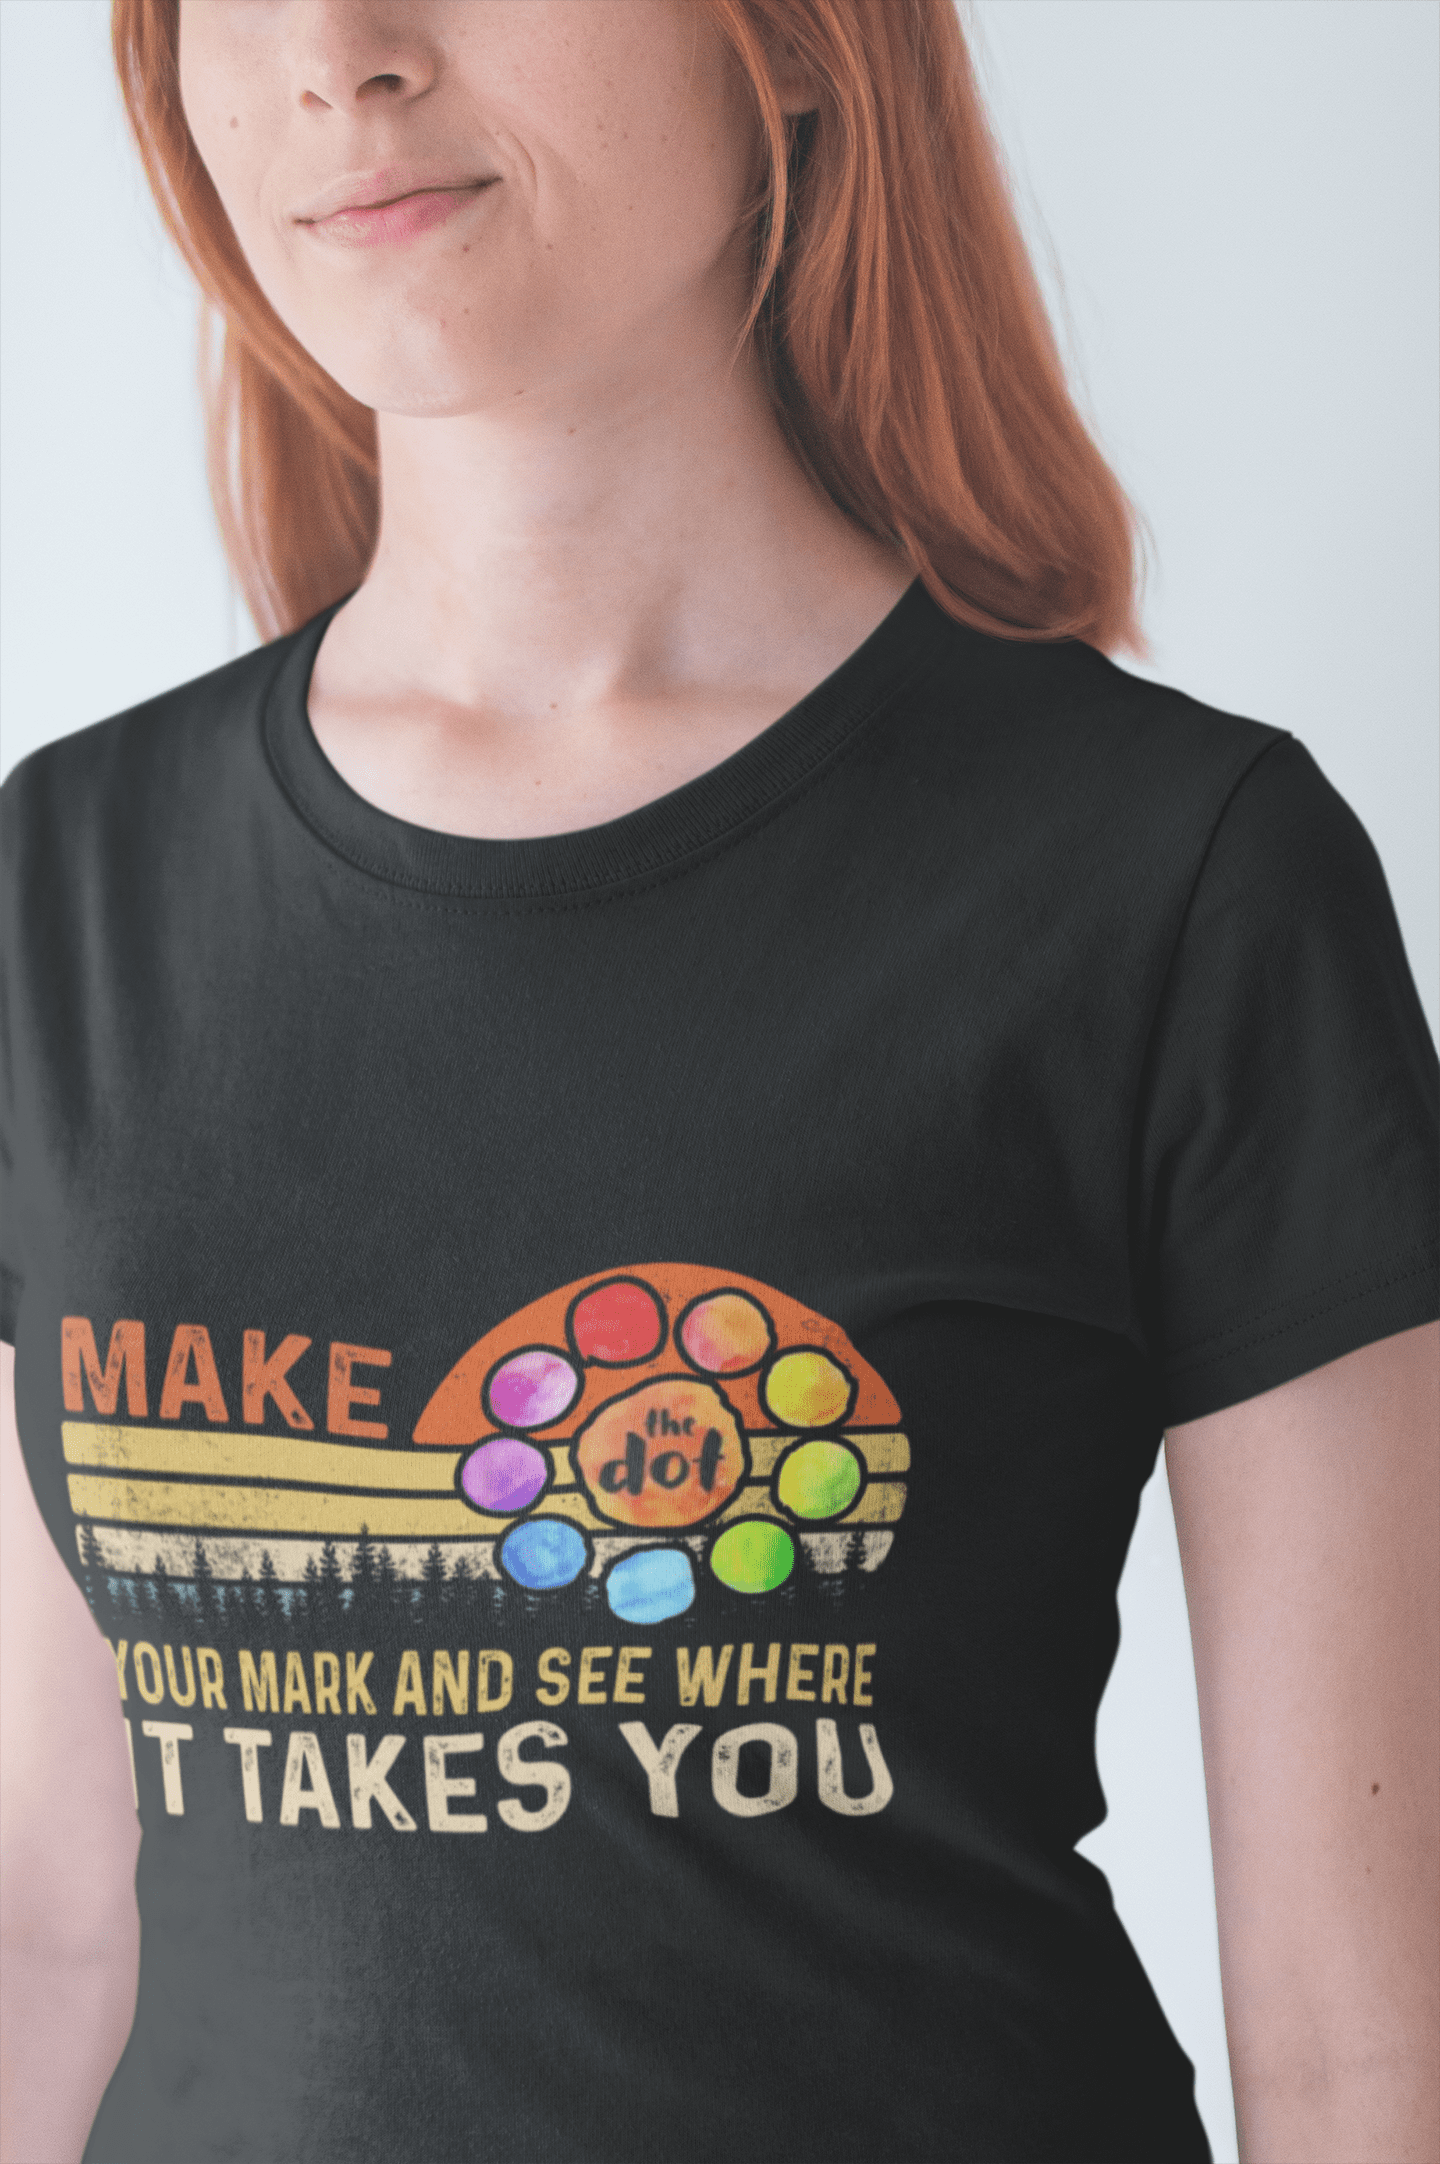 smiling-woman-wearing-a-t-shirt-mockup-against-a-white-wall-a20899